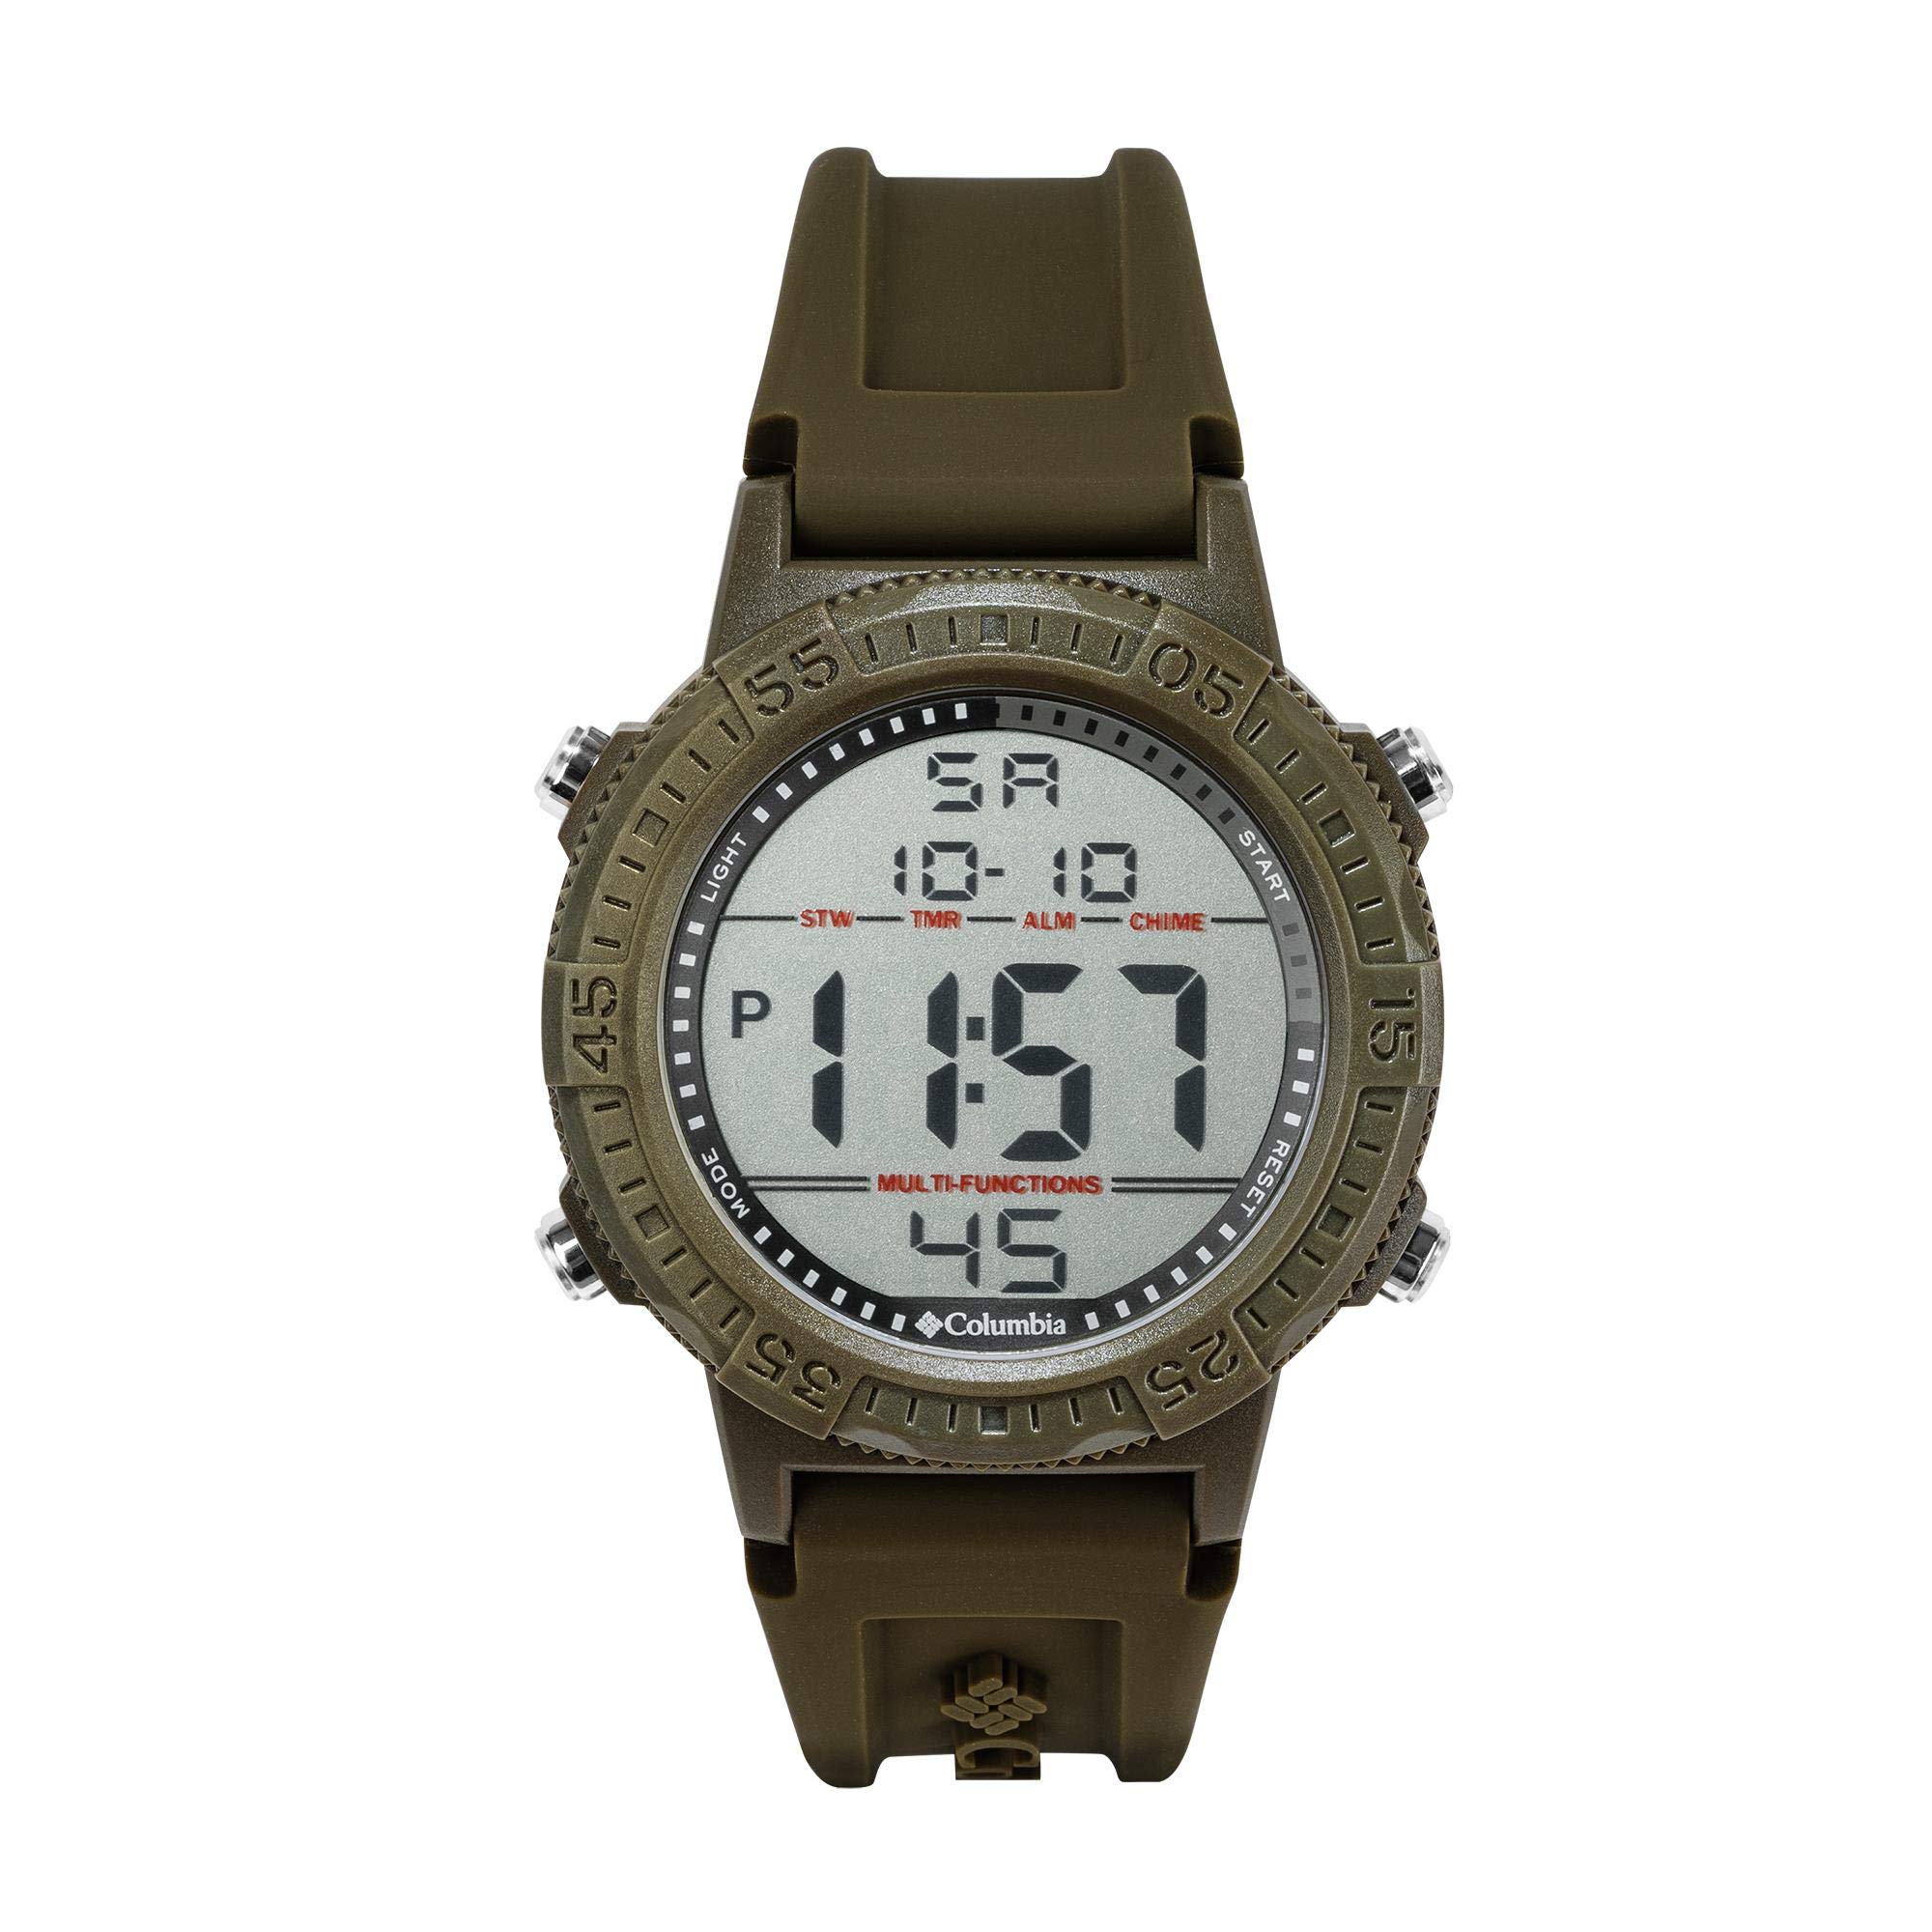 Columbia Timing Polycarbonate Sports Watch